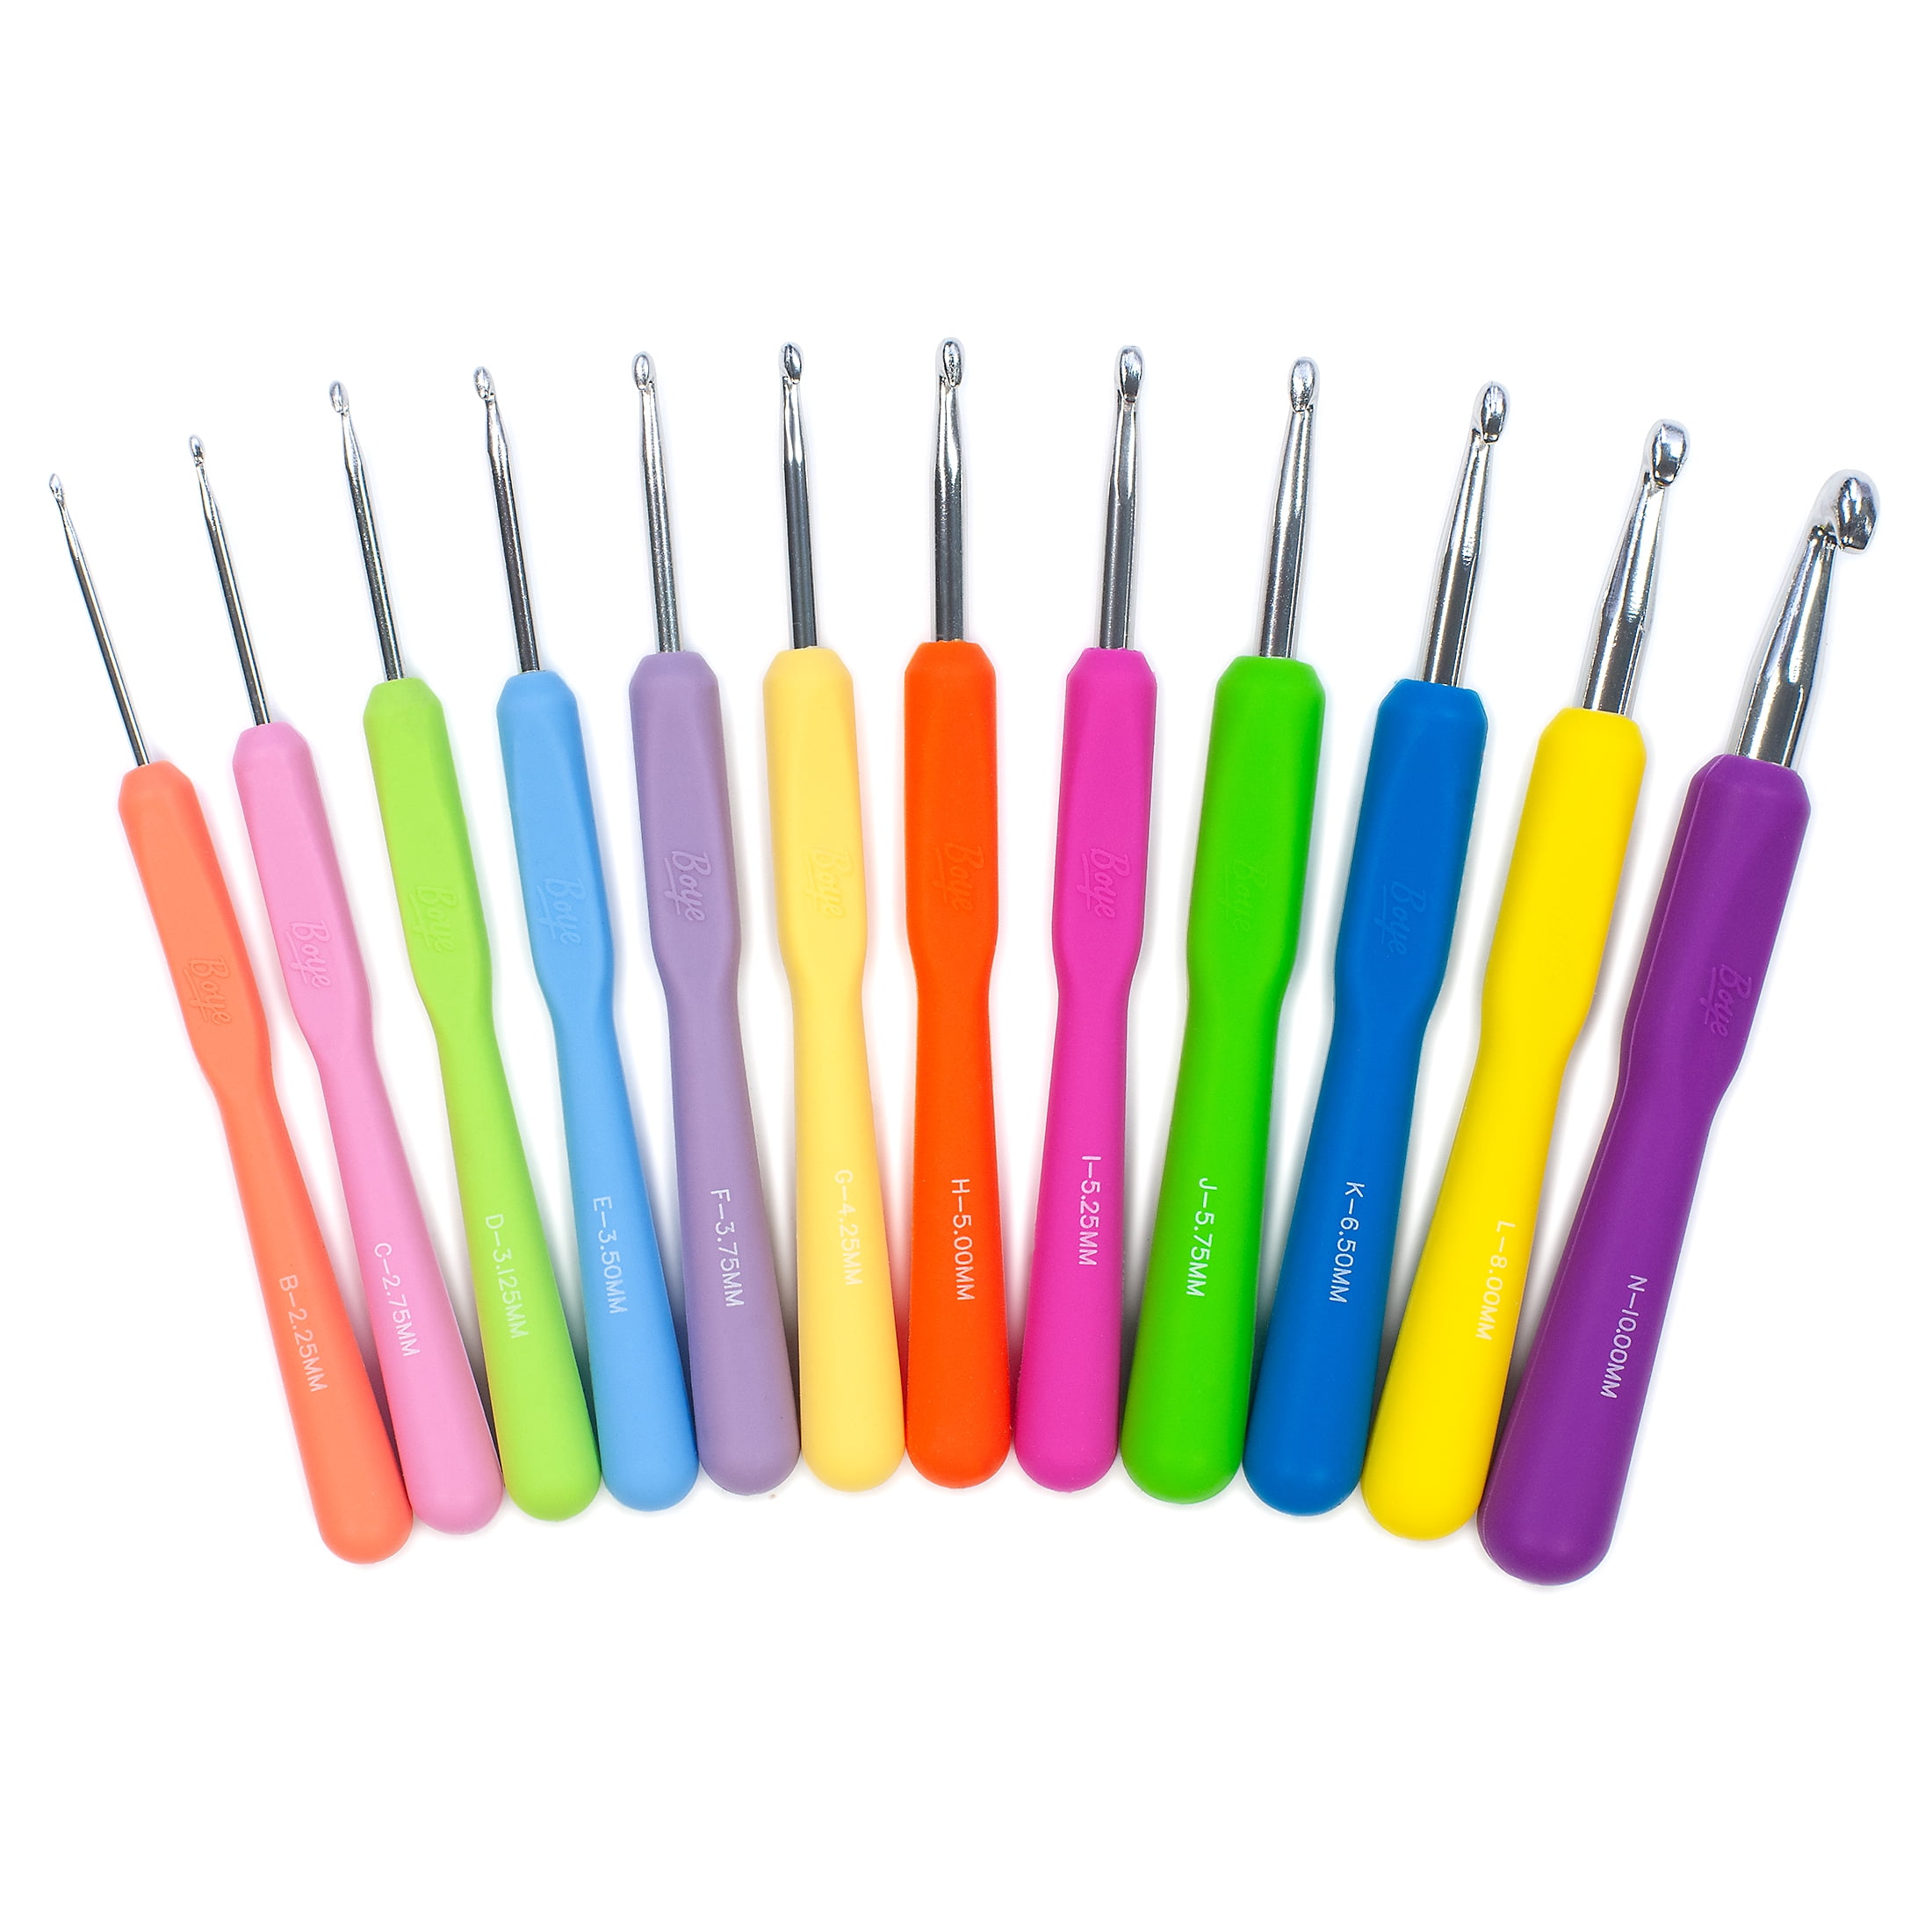 Great Value!! Sizes B to N You get ALL the Boye Aluminum Crochet Hooks 12pc Boye Crochet Hook collection